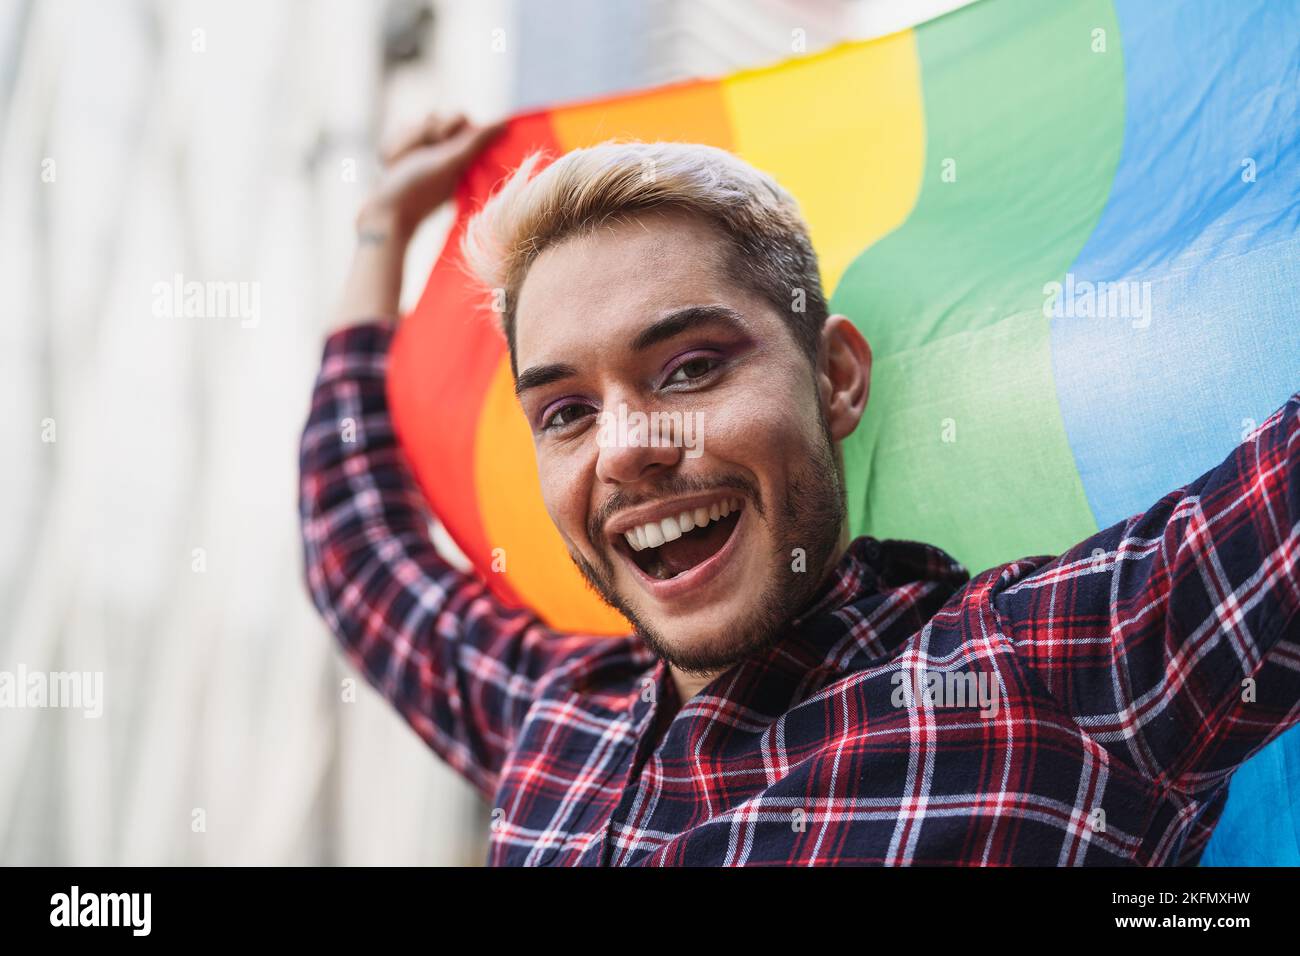 Happy gay man celebrating the pride festival with the LGBTQ rainbow flag Stock Photo